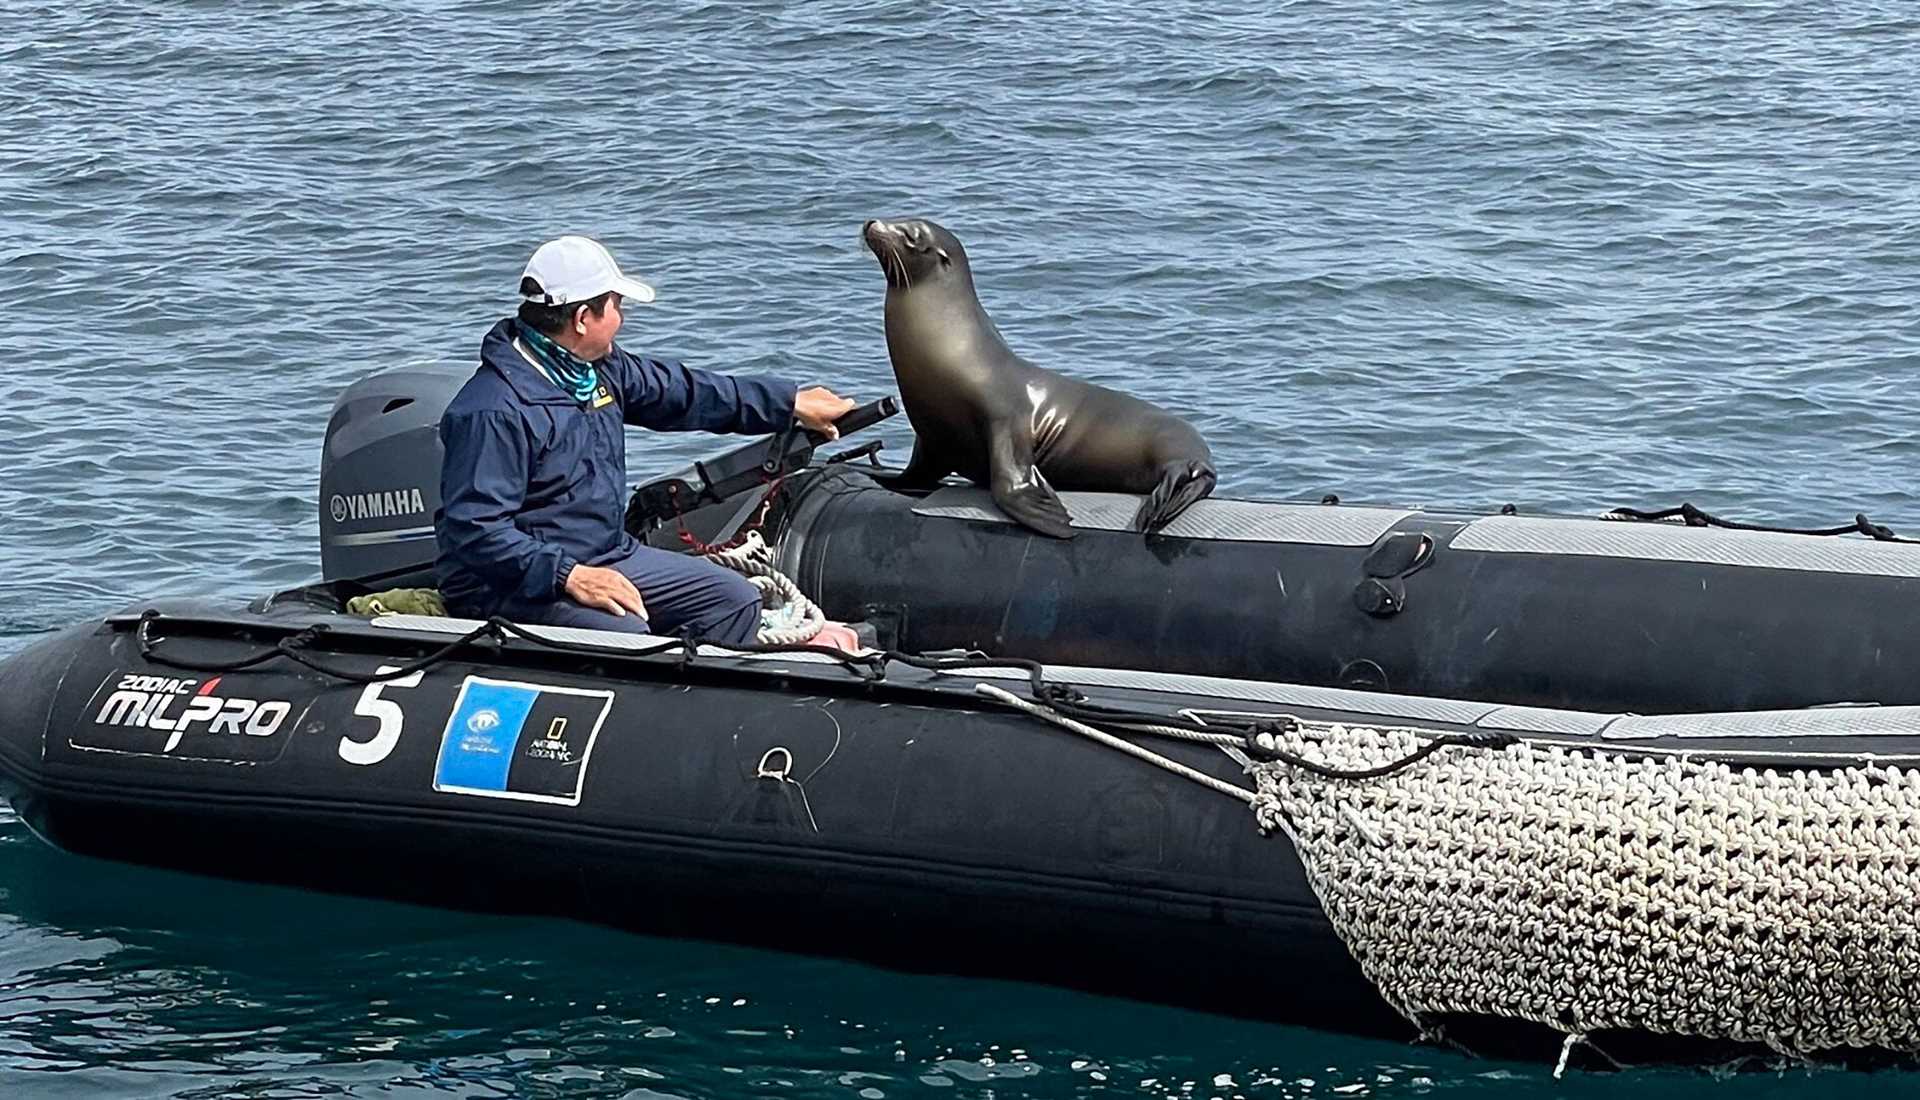 sea lion sitting on the side of a zodiac